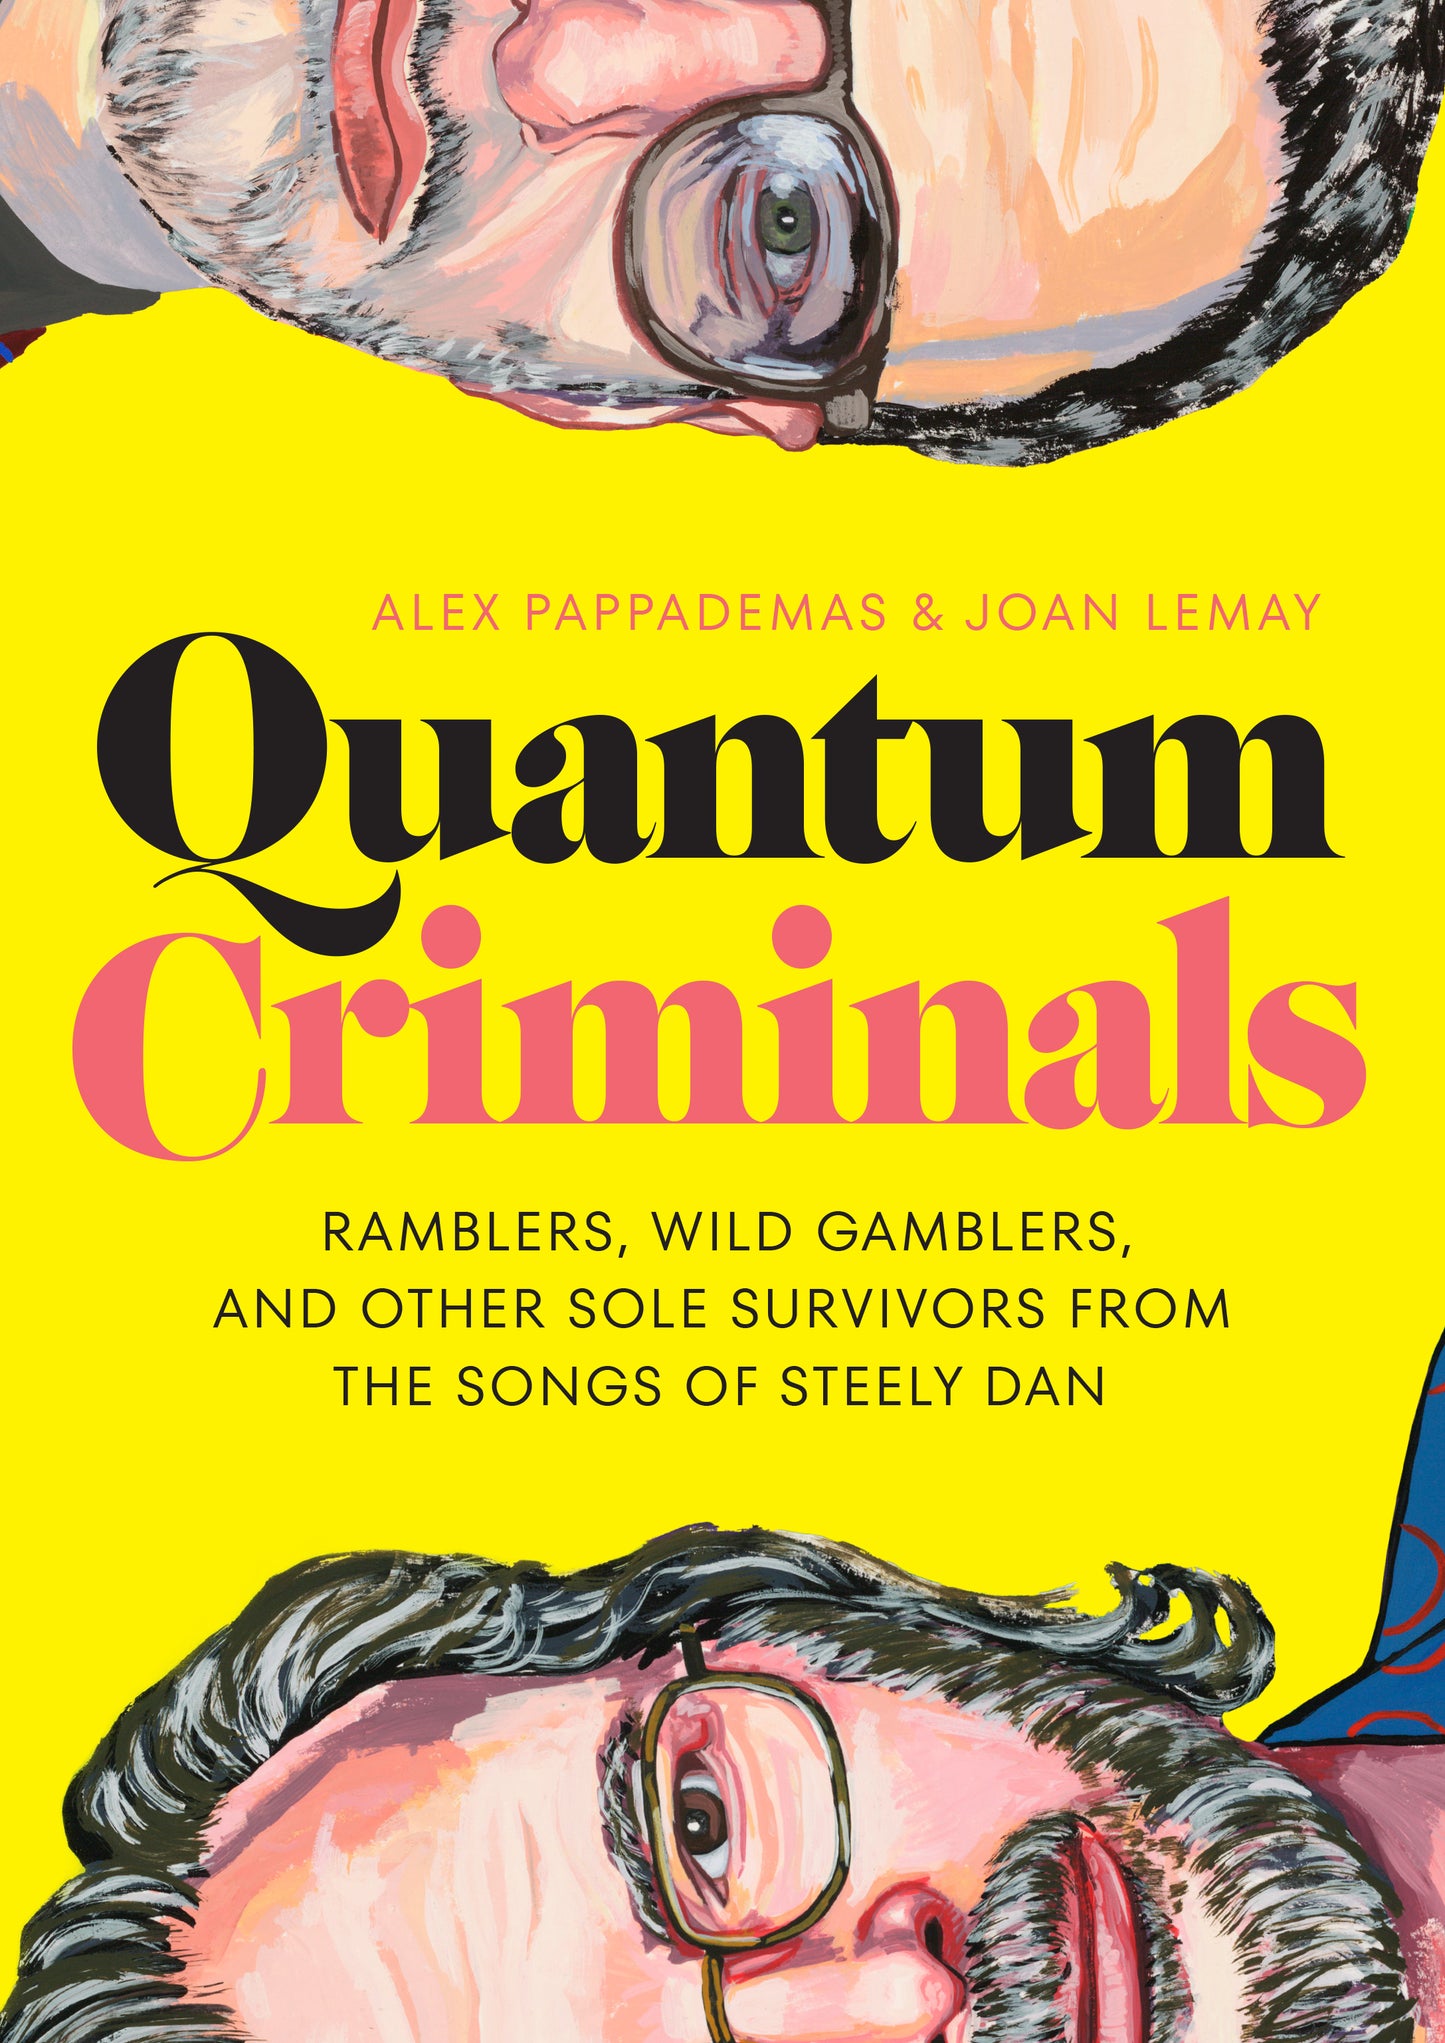 STEELY DAN - QUANTUM CRIMINALS: RAMBLERS, WILD GAMBLERS, AND OTHER SOLE SURVIVORS FROM THE SONGS OF STEELY DAN - HARDCOVER - BOOK